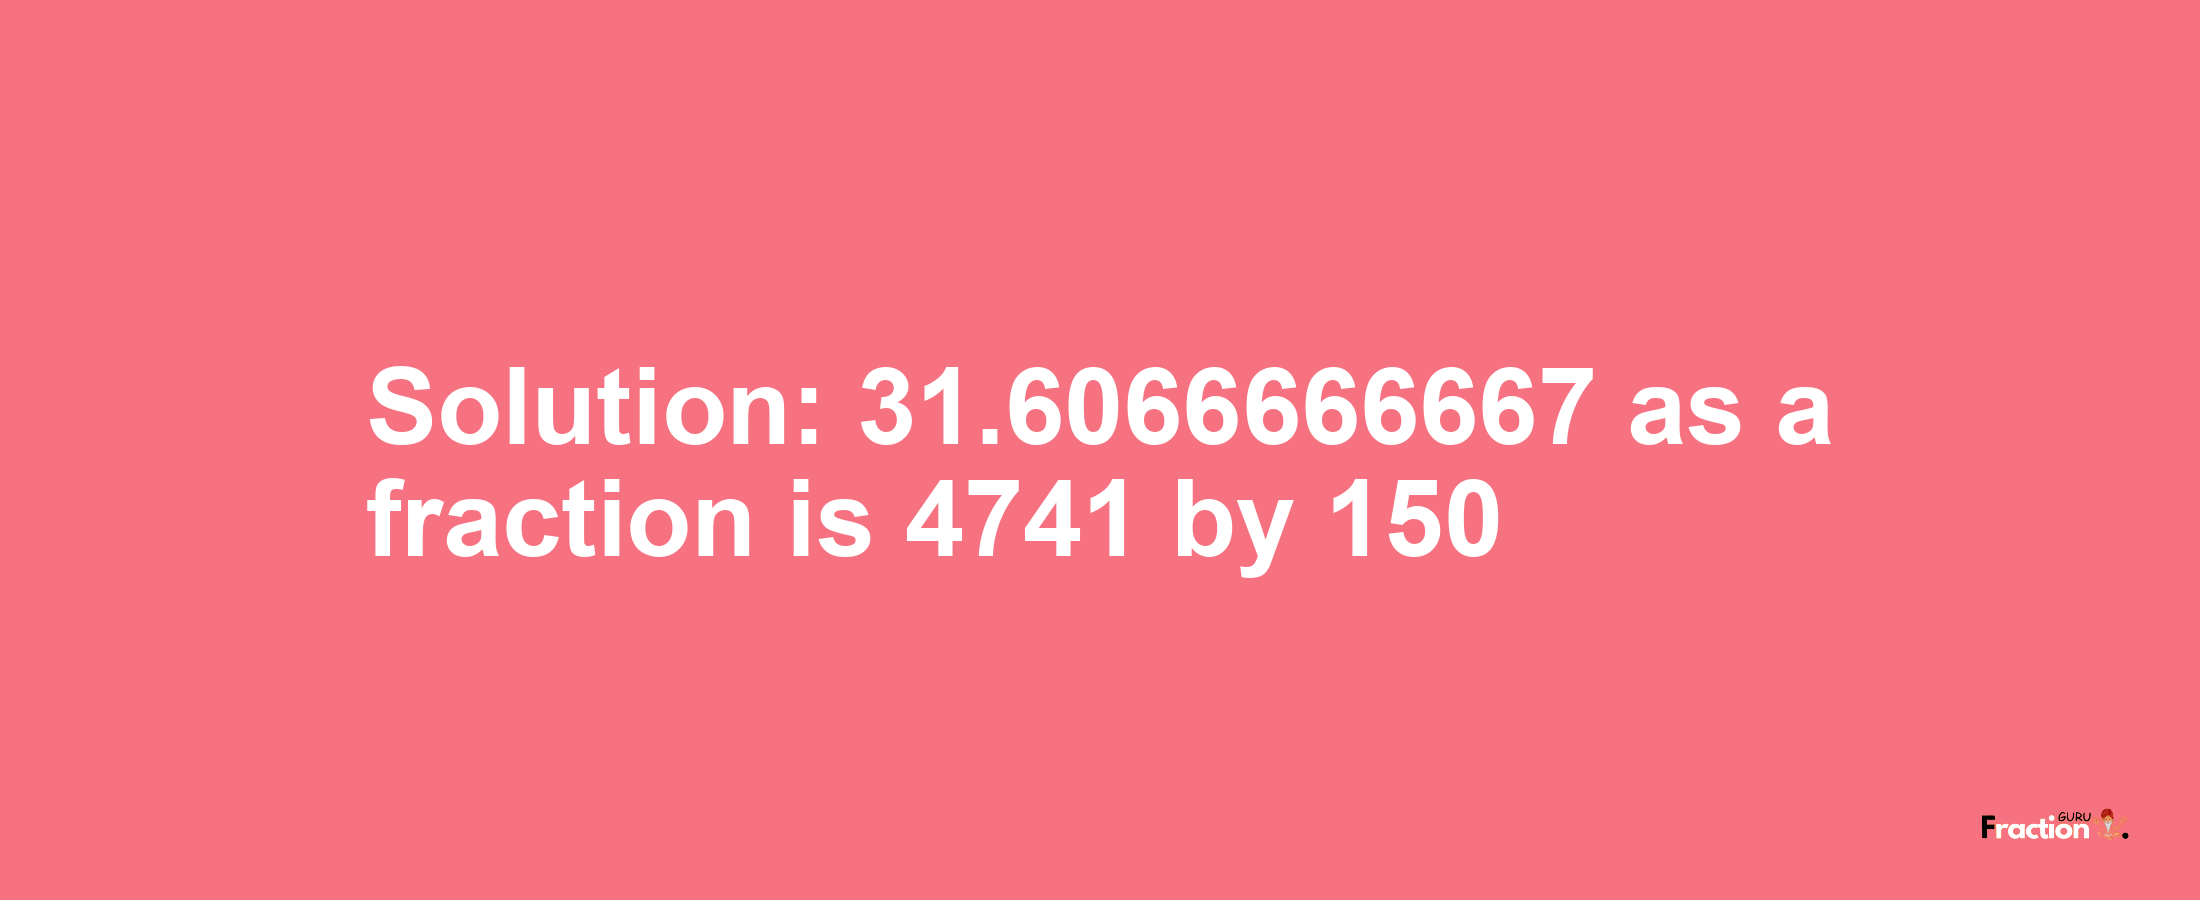 Solution:31.6066666667 as a fraction is 4741/150